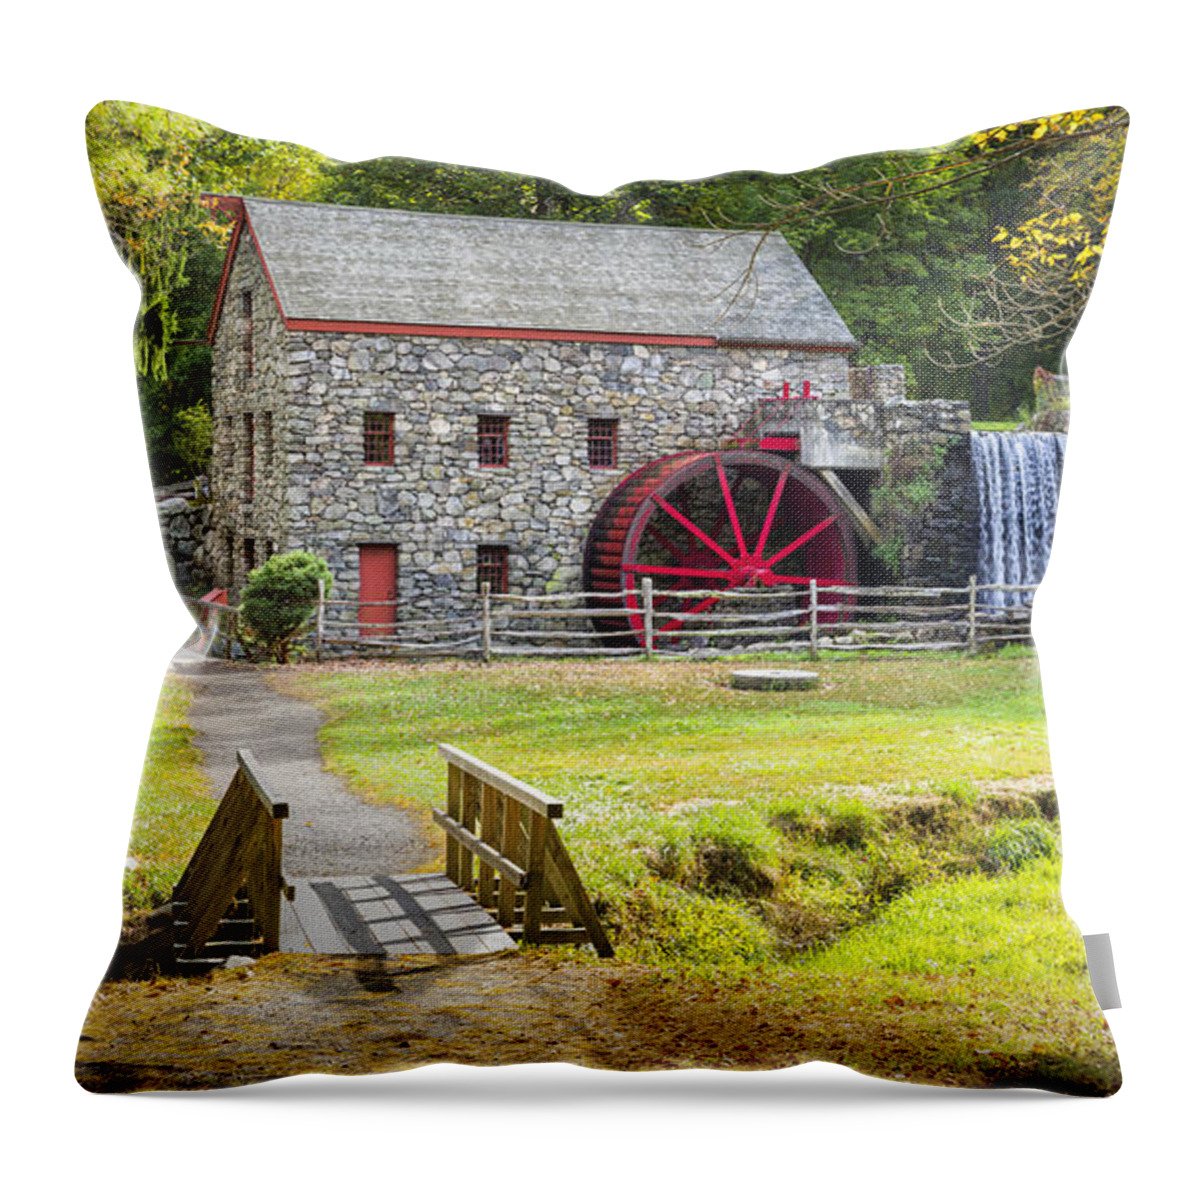 Wayside Throw Pillow featuring the photograph Wayside Inn Grist Mill by Kyle Wasielewski